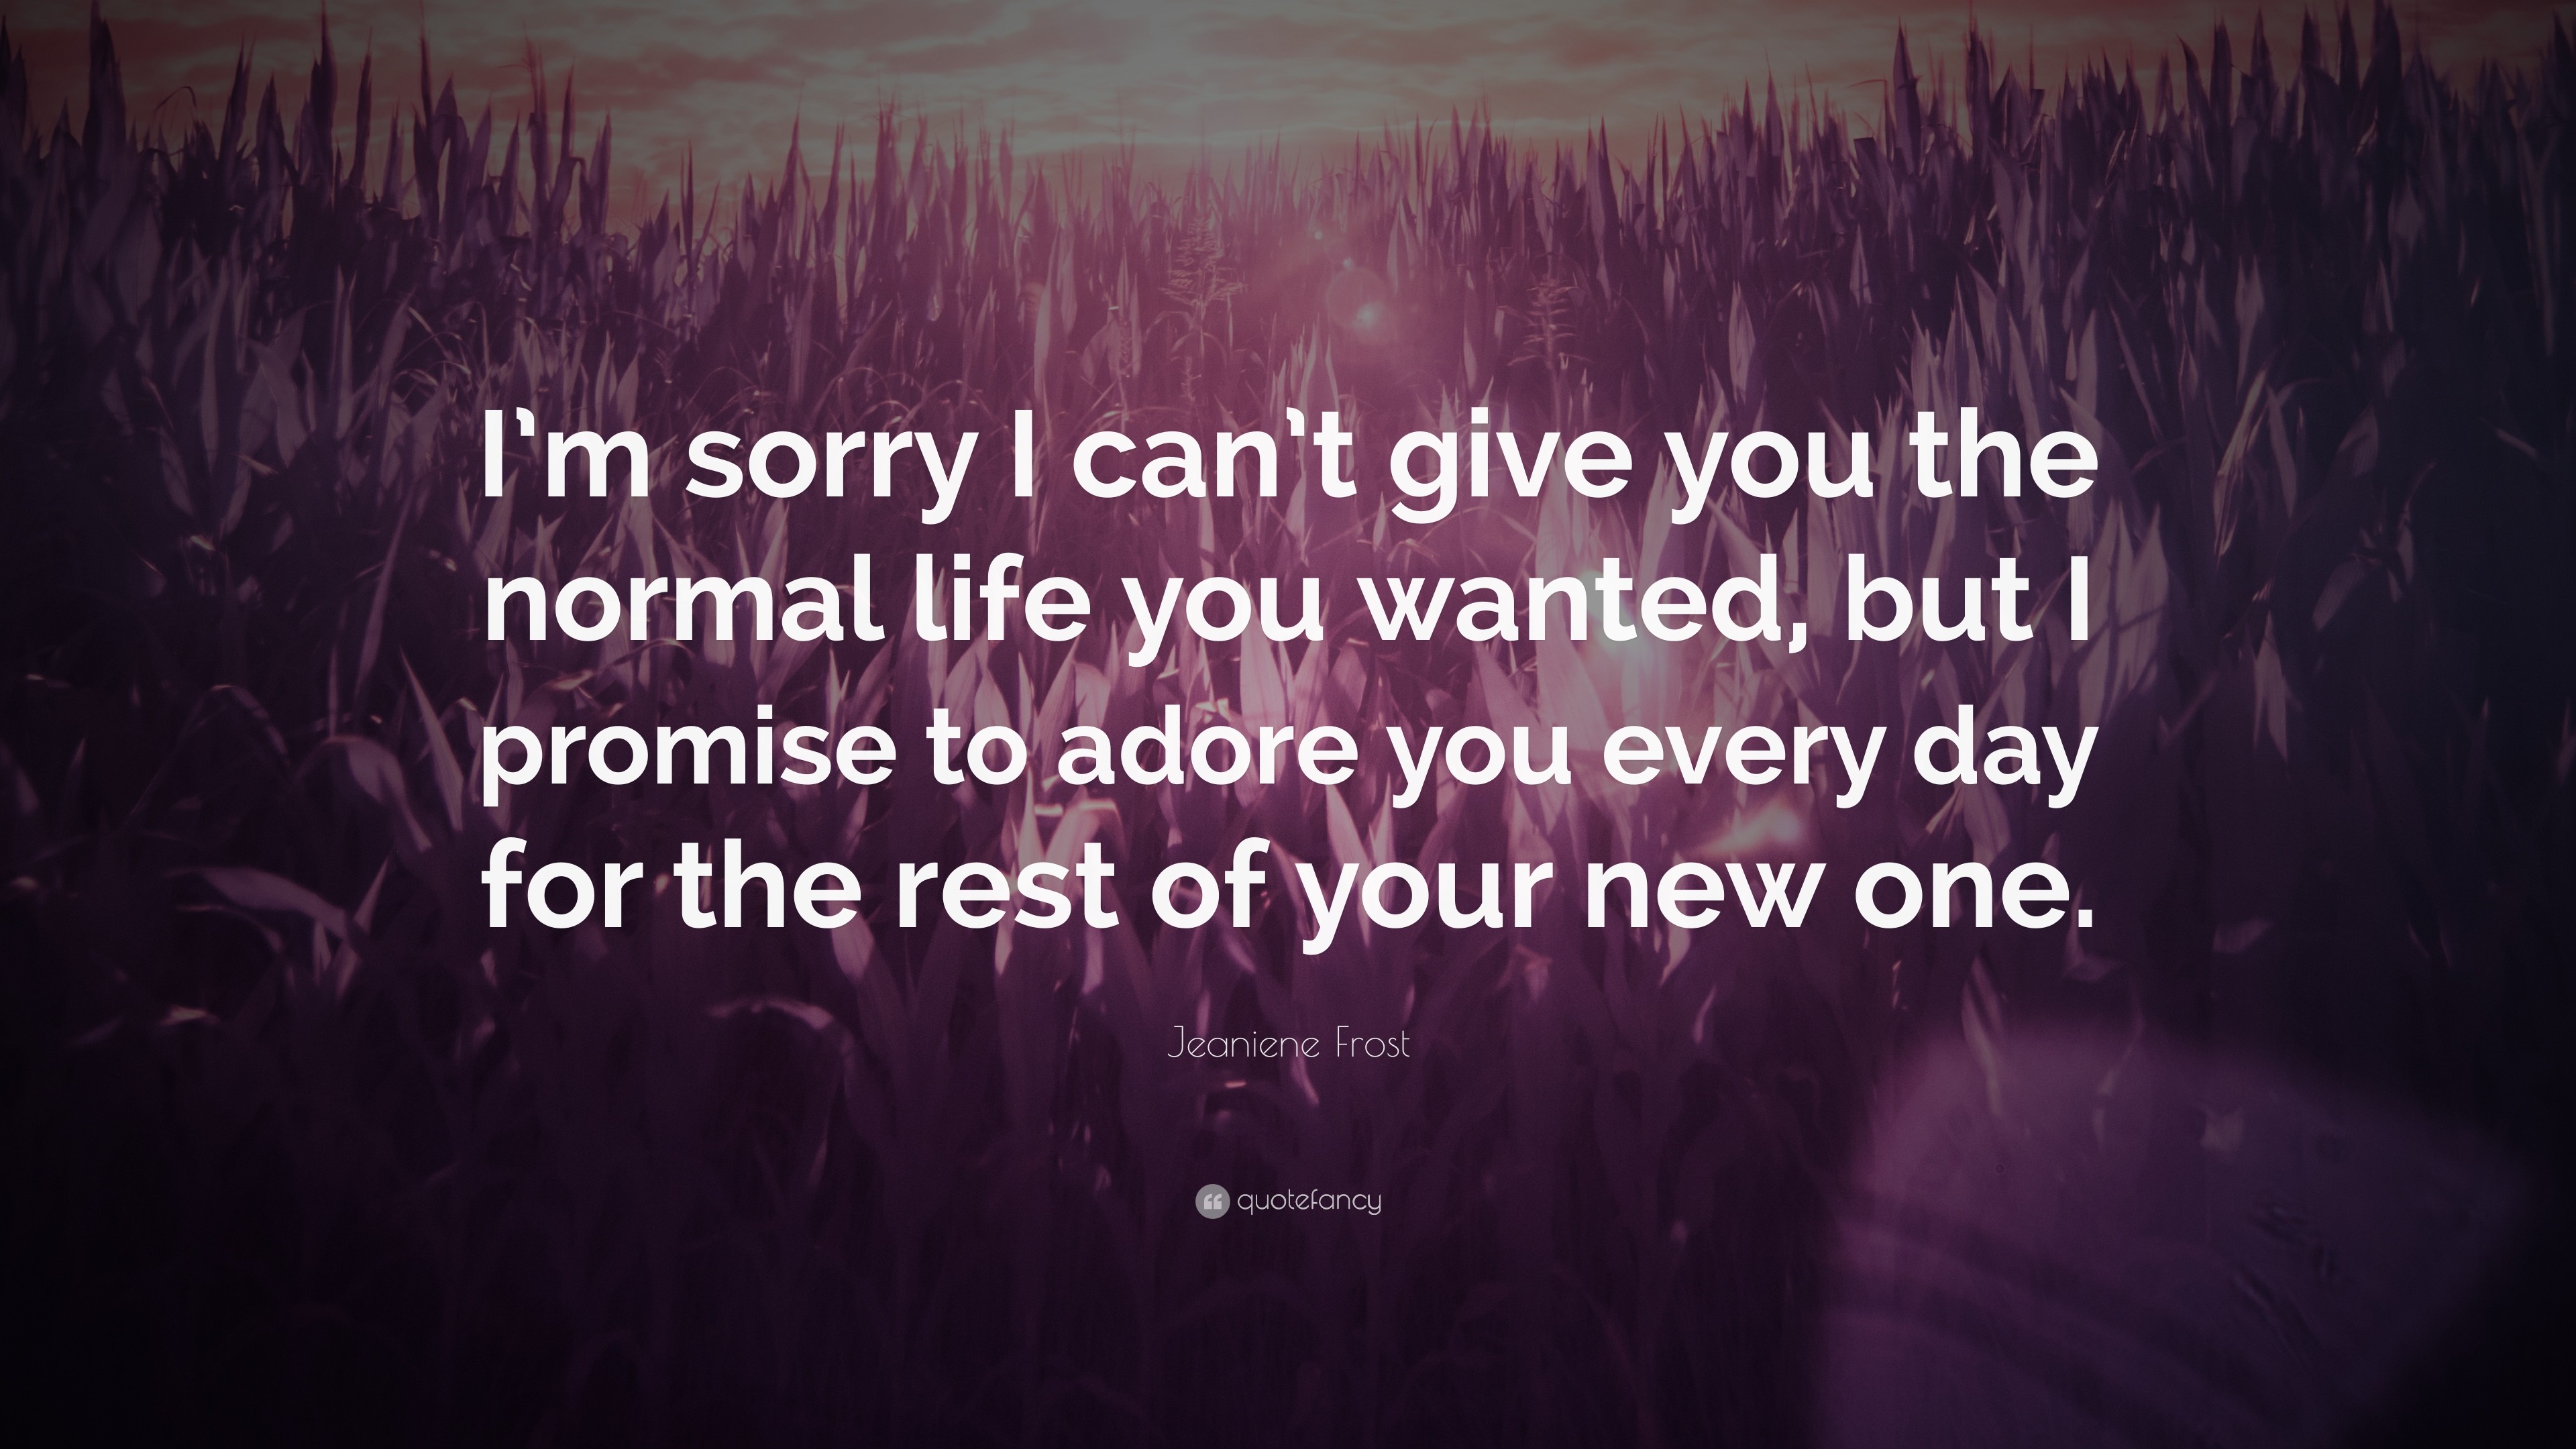 3840x2160 Jeaniene Frost Quote: “I'm sorry I can't give you the